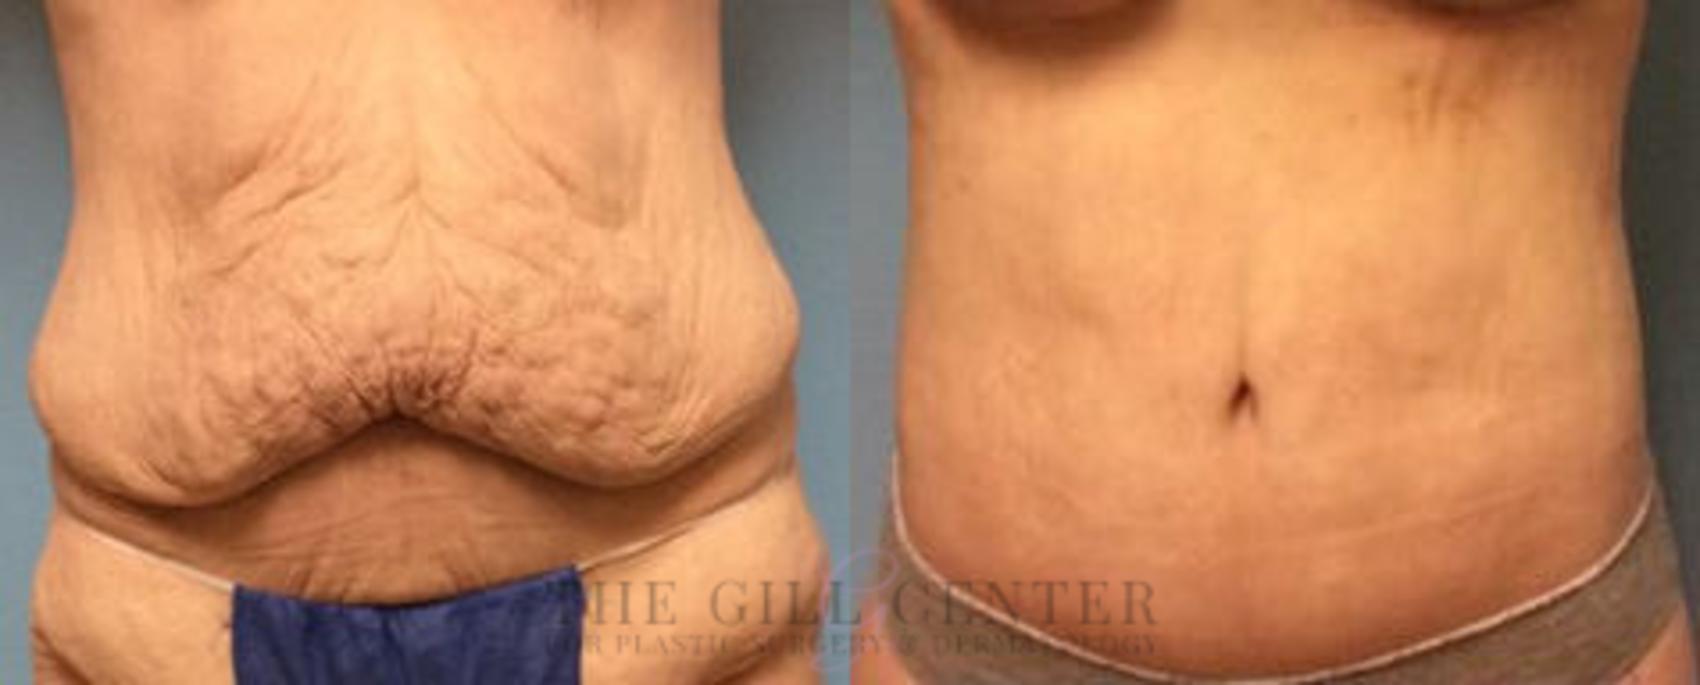 Body Lift Case 338 Before & After Front | The Woodlands, TX | The Gill Center for Plastic Surgery and Dermatology